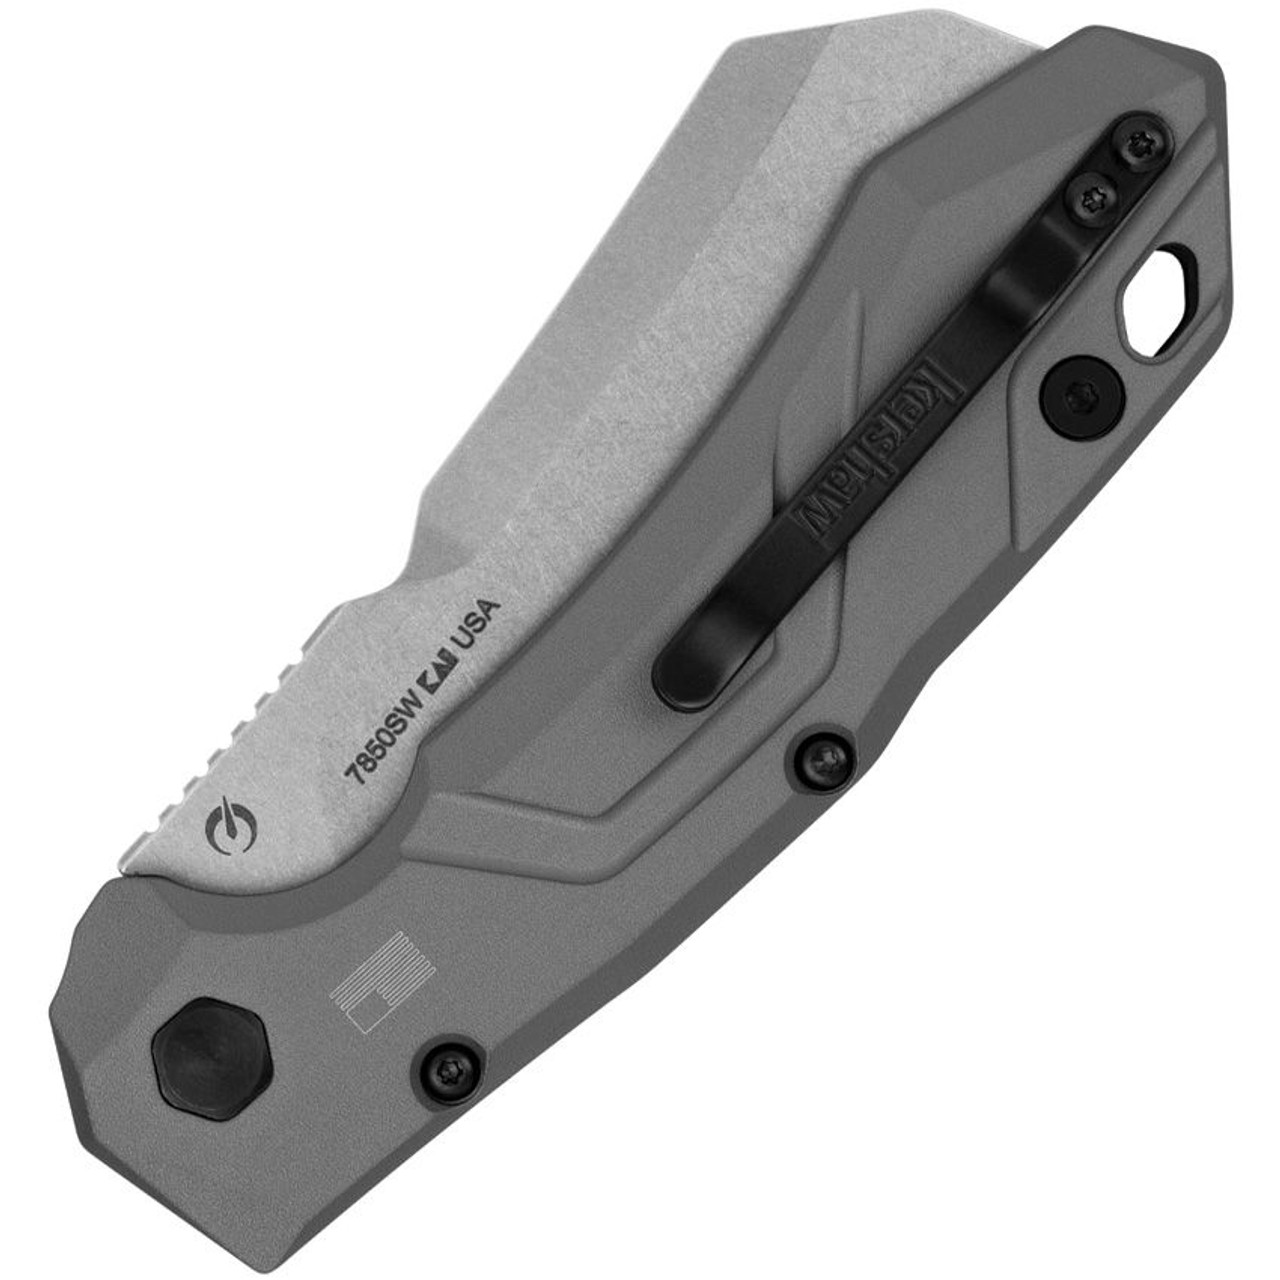 Kershaw Launch 14 Automatic Knife (7850SW)- 3.375" Stonewashed CPM-154 Cleaver Blade, Black Aluminum w/ Carbon Fiber Inlay Handle